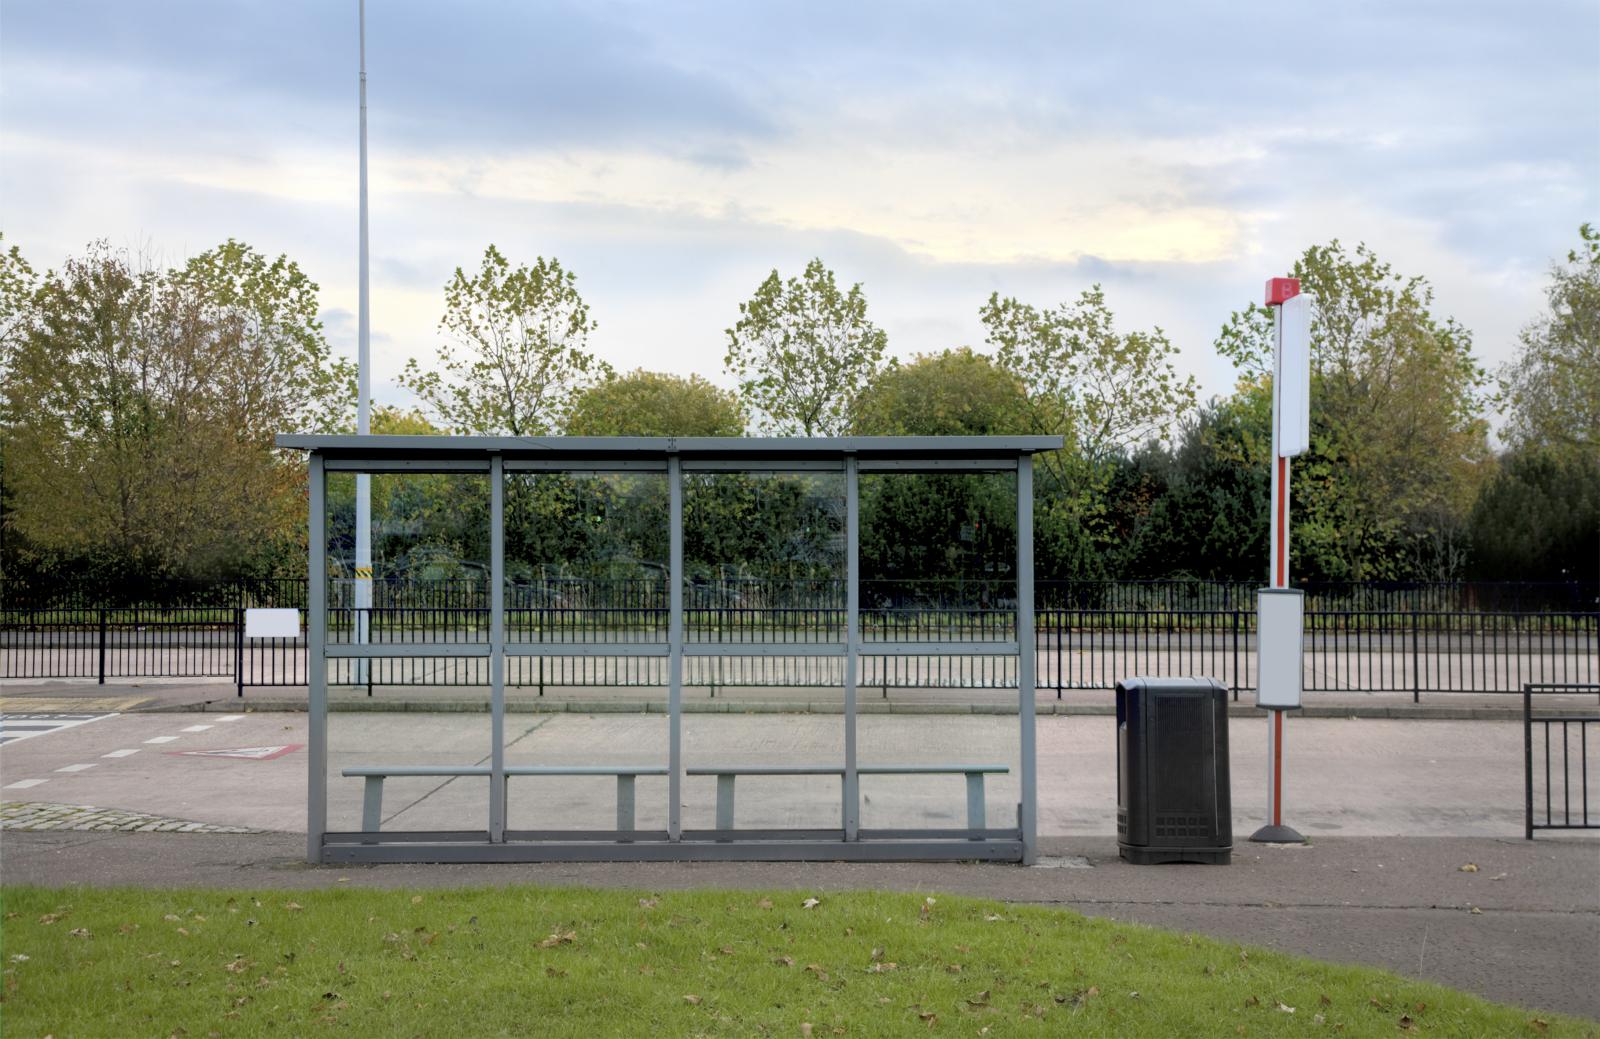 An empty bus stop